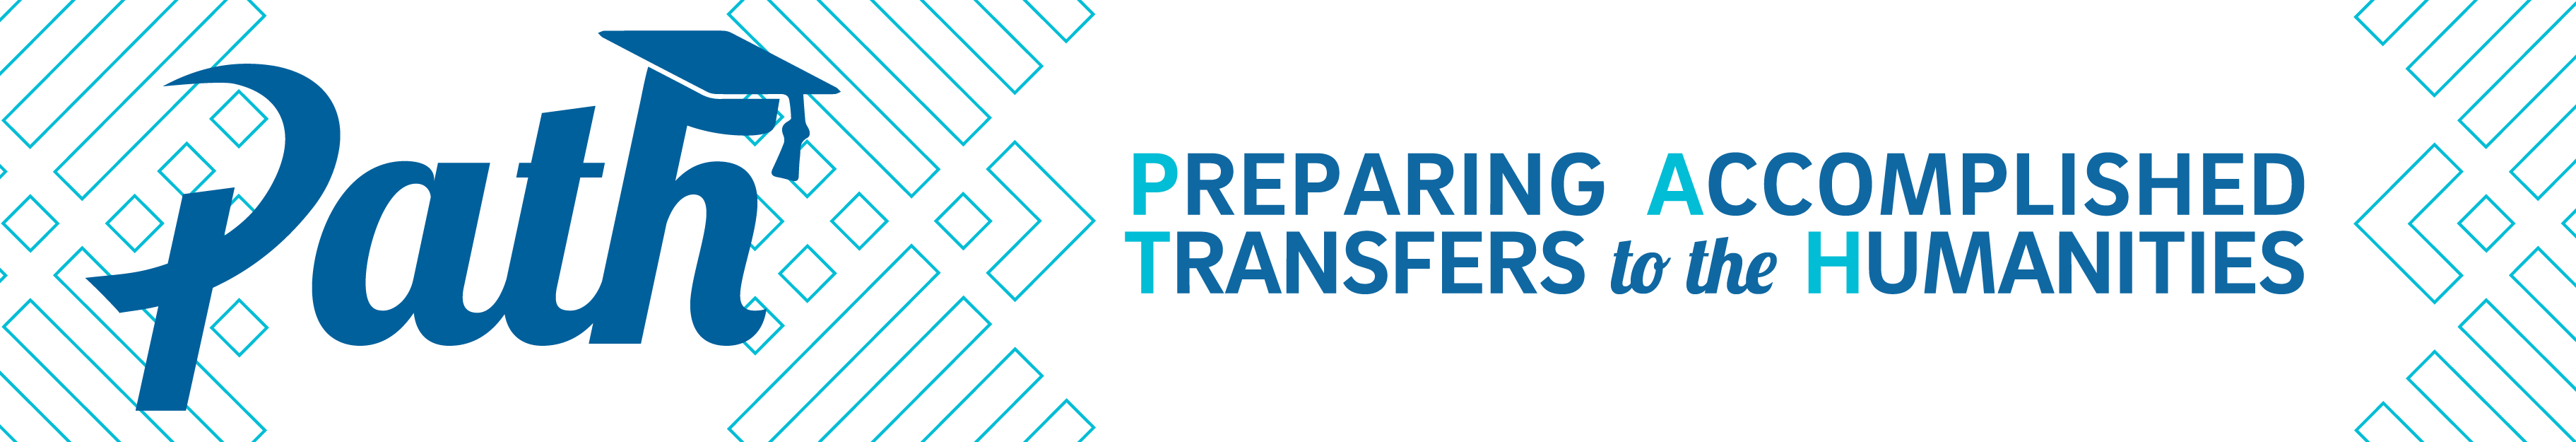 Preparing Accomplished Transfers to the Humanities